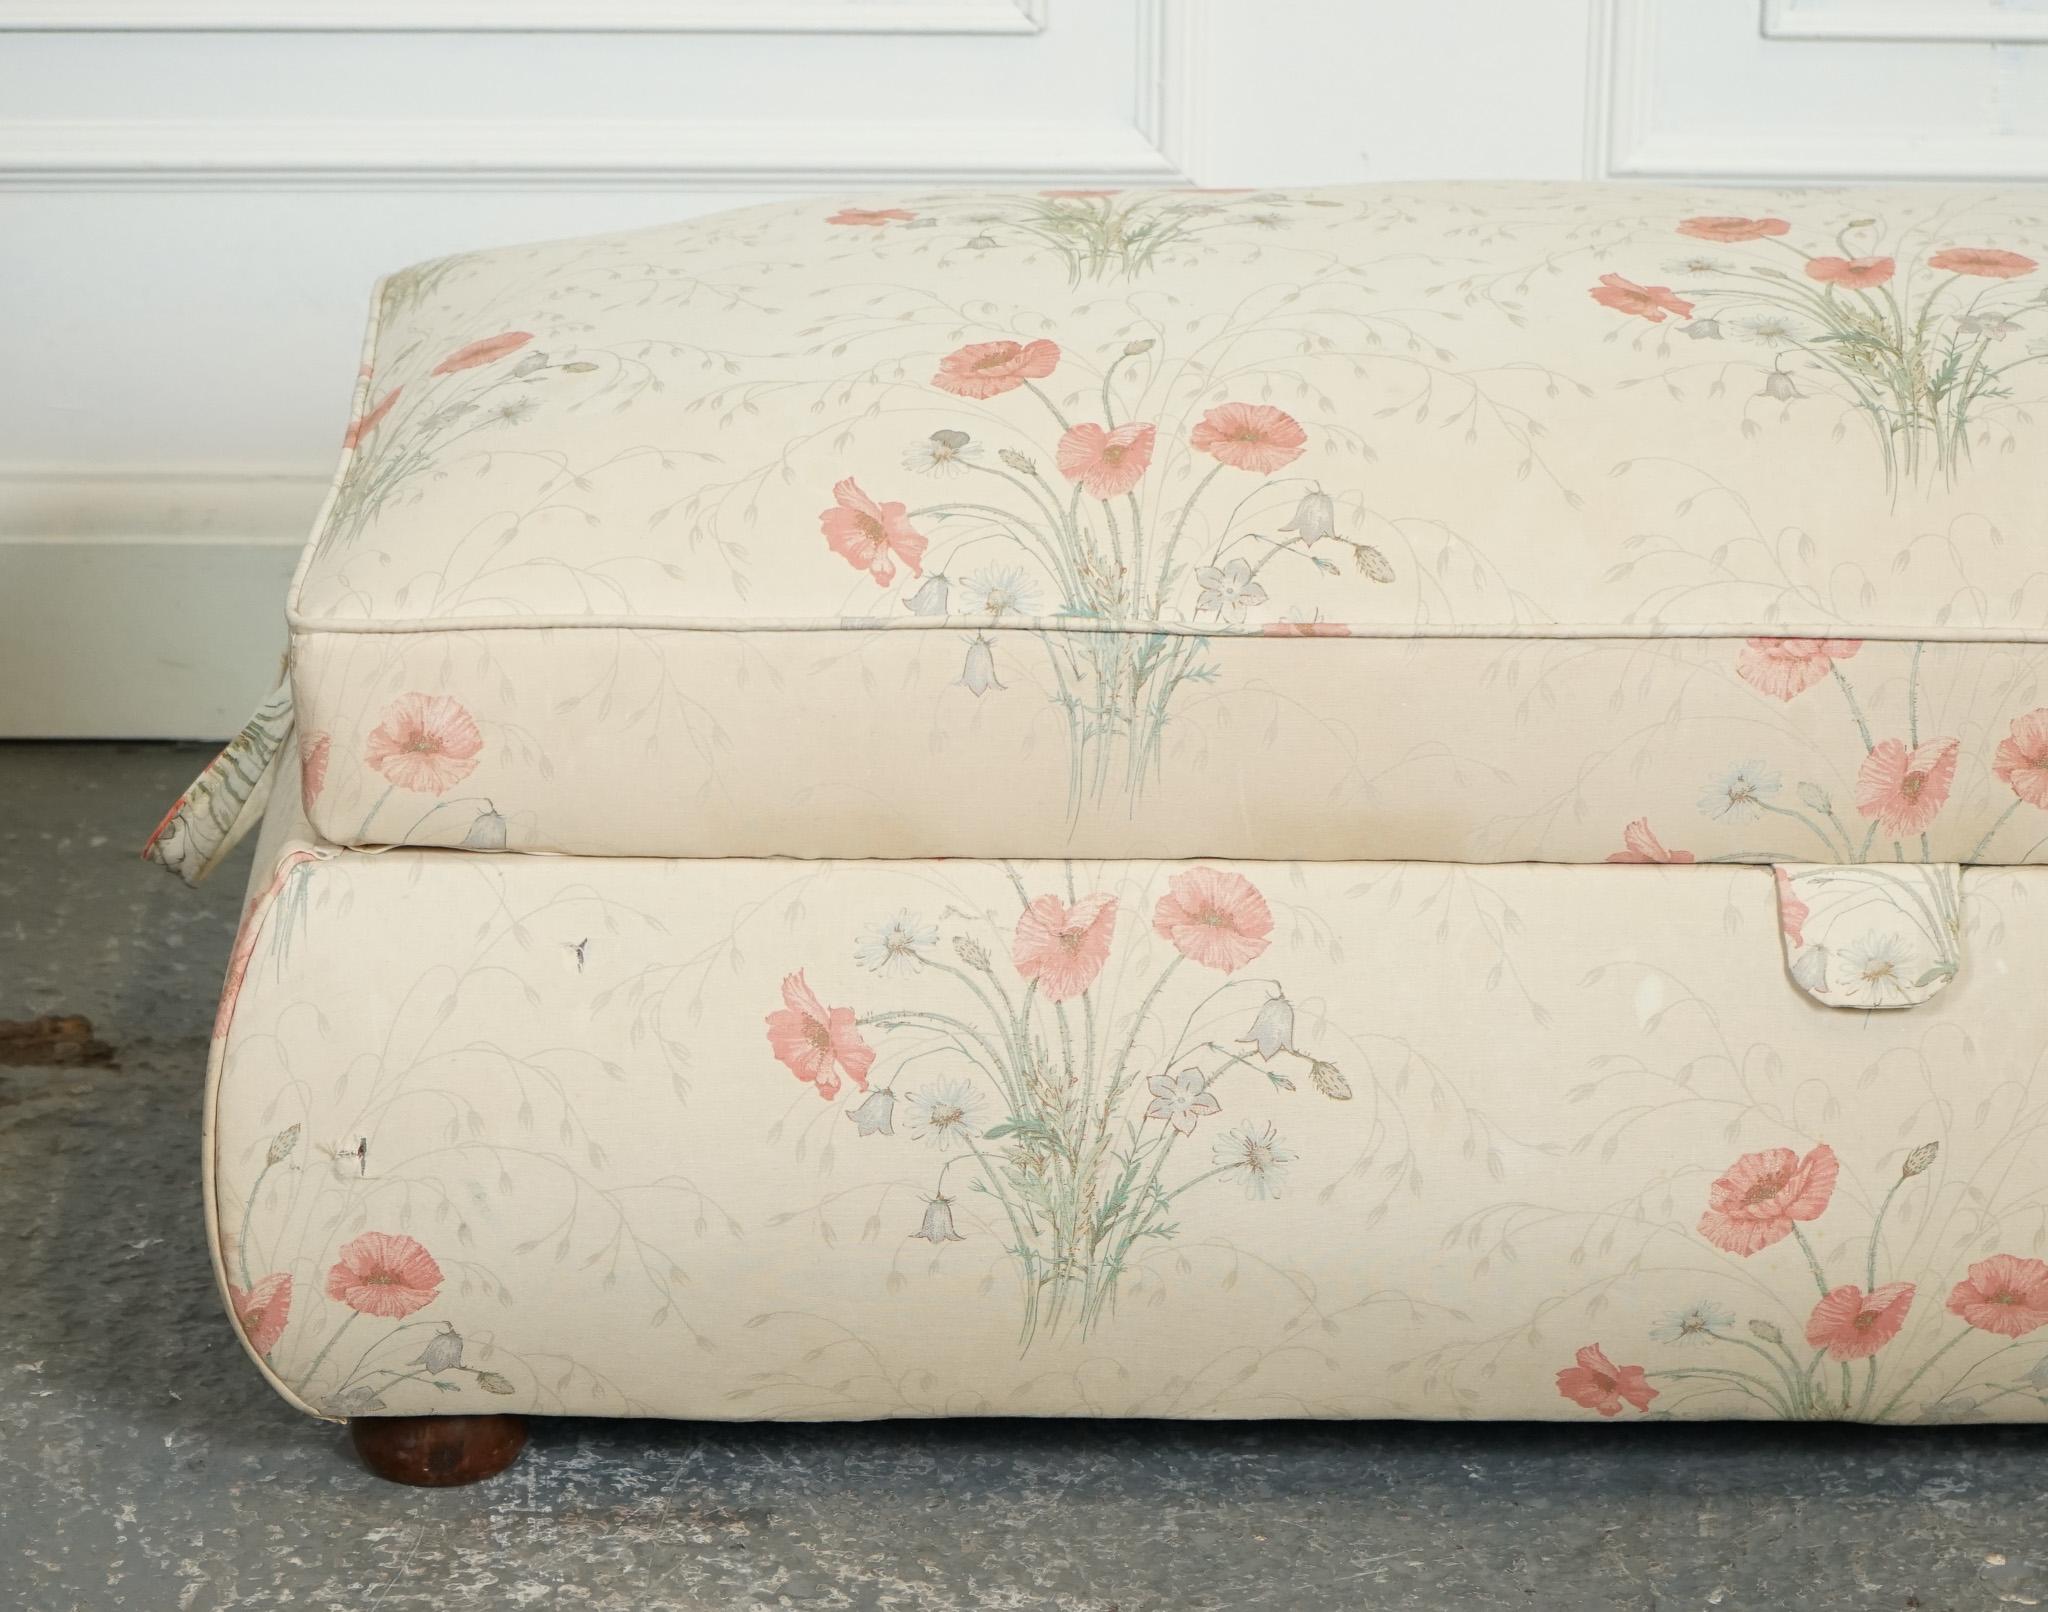 British LARGE ANTIQUE VICTORIAN POPPY FLOWER PATTERN FABRiC OTTOMAN CHEST TRUNK  J1 For Sale